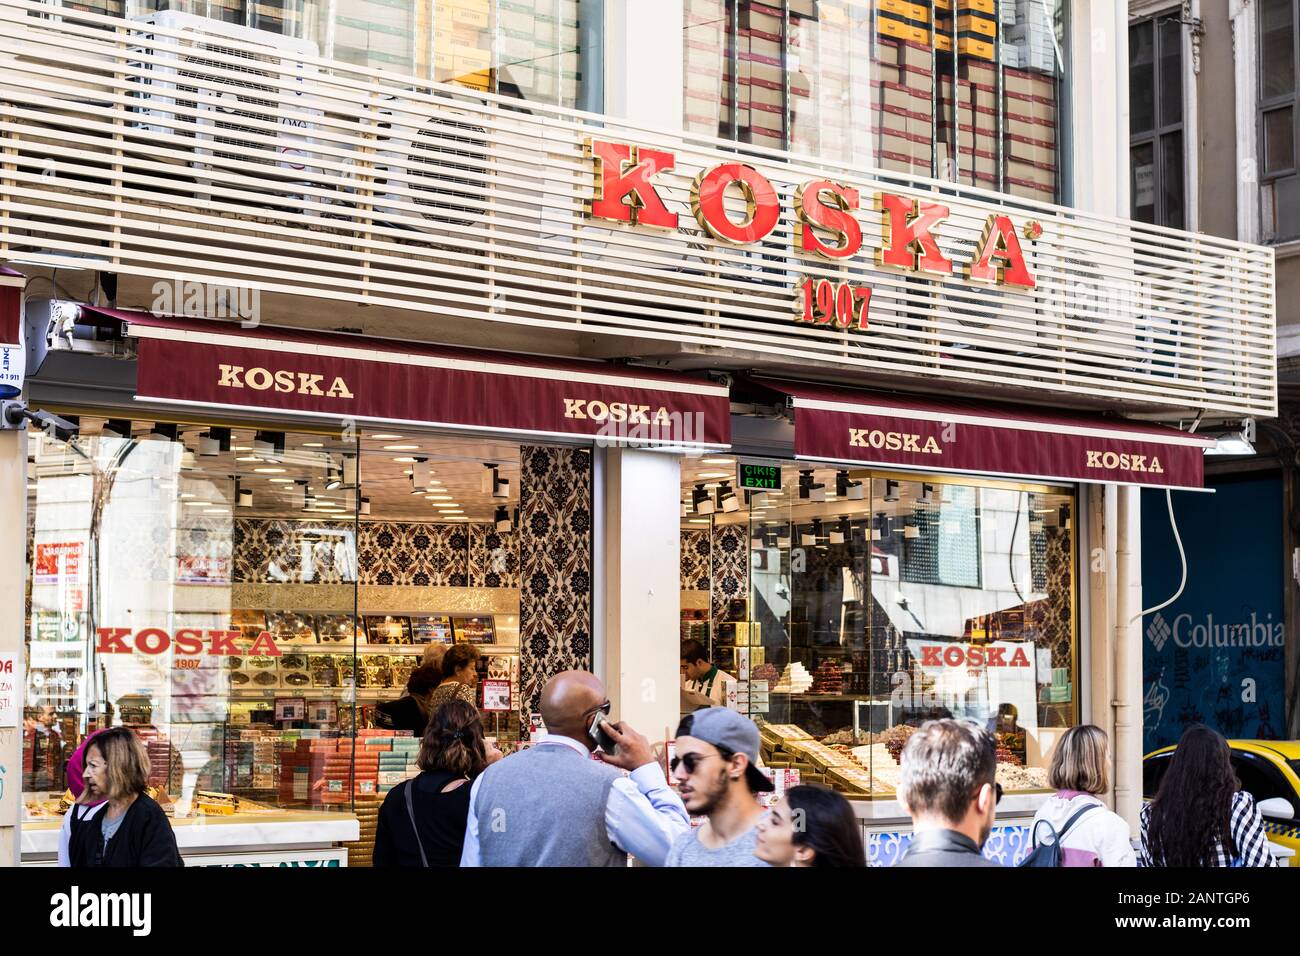 Koska historical dessert shop. Turkey is manufacturing. It has stores in many regions. Stock Photo